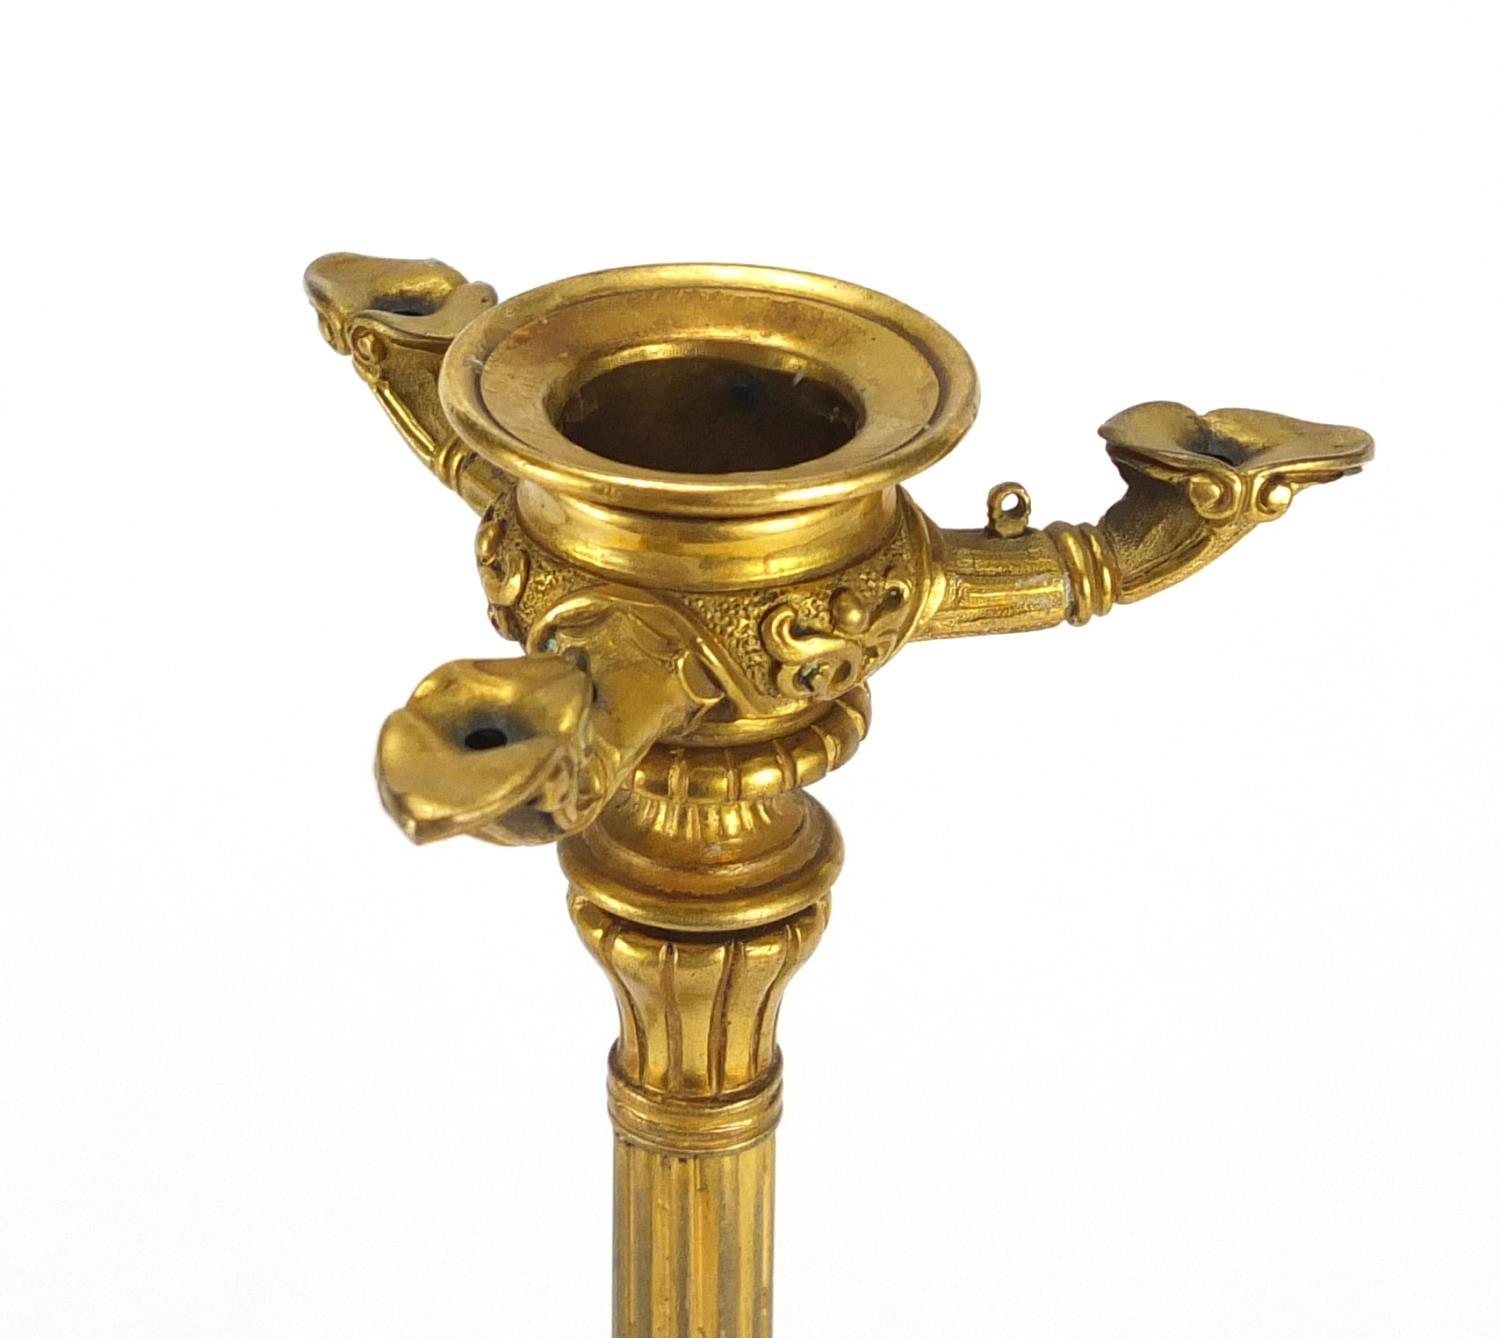 Pair of 19th century ormolu candlesticks with reeded columns, lion masks and claw feet, each 34. - Image 4 of 6